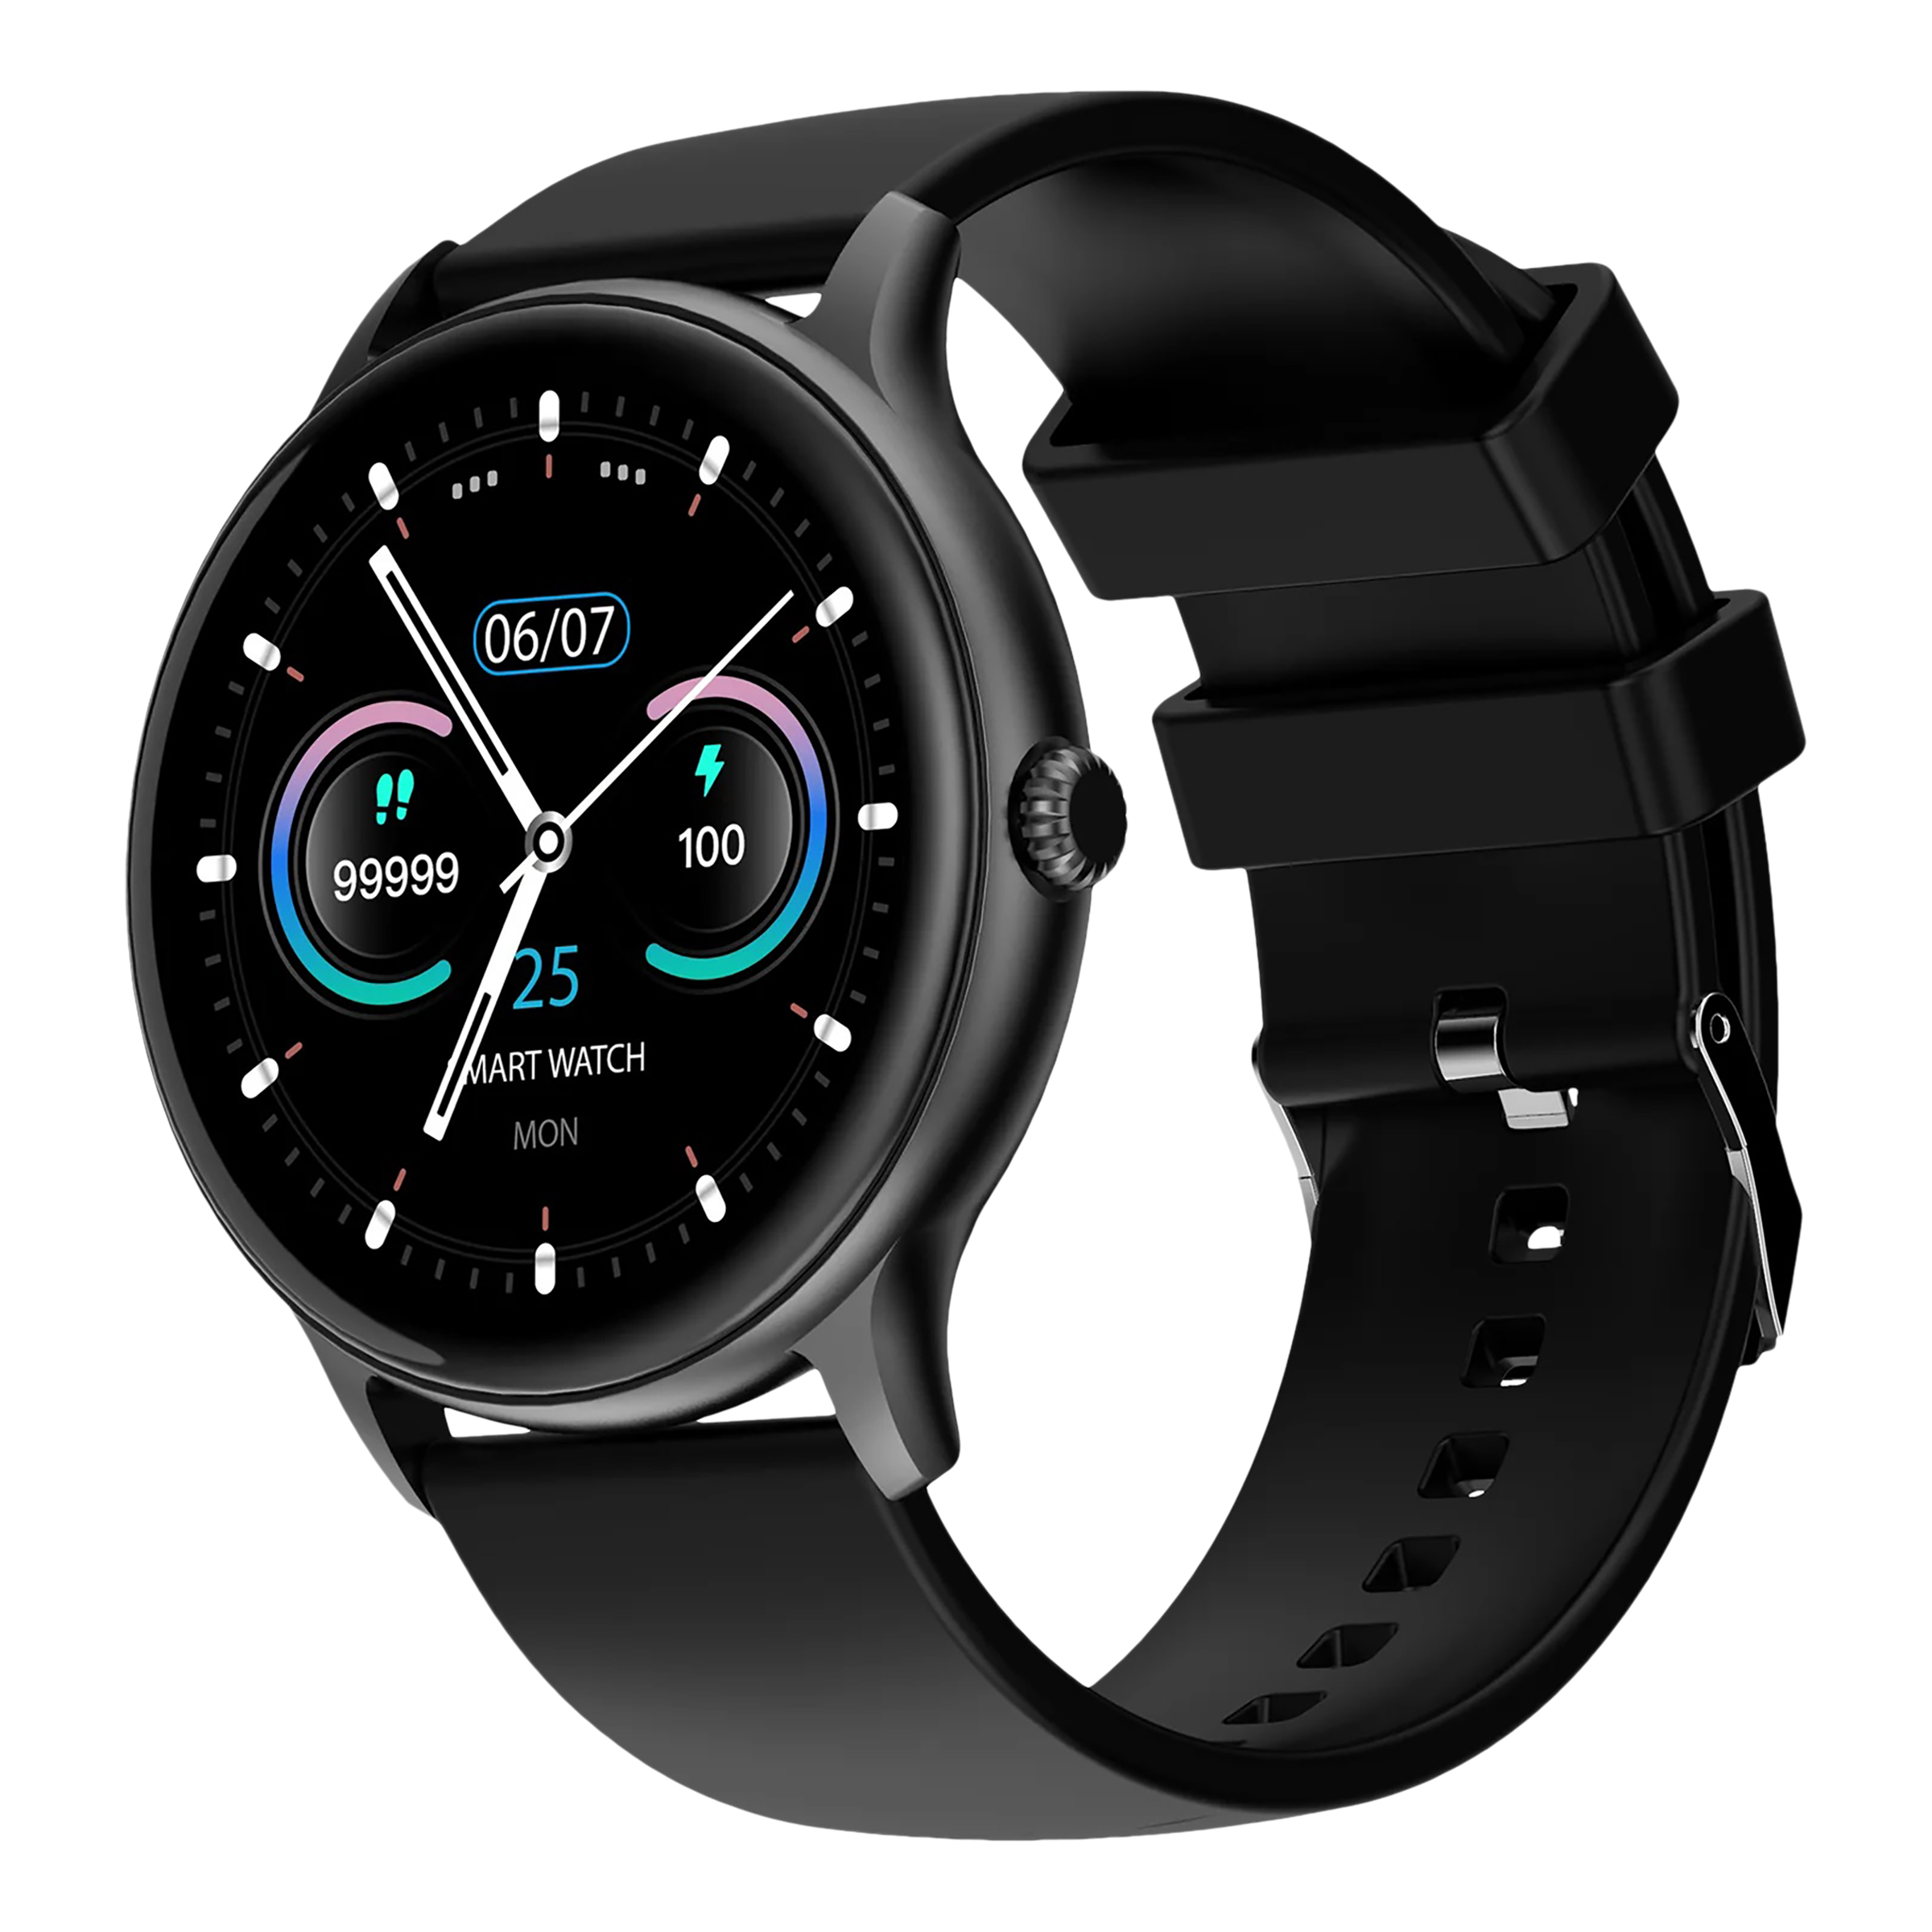 FIRE-BOLTT Hurricane Pro Smartwatch With Activity Tracker (35.3mm HD Display, IP67 Water Resistant, Black Strap)_1